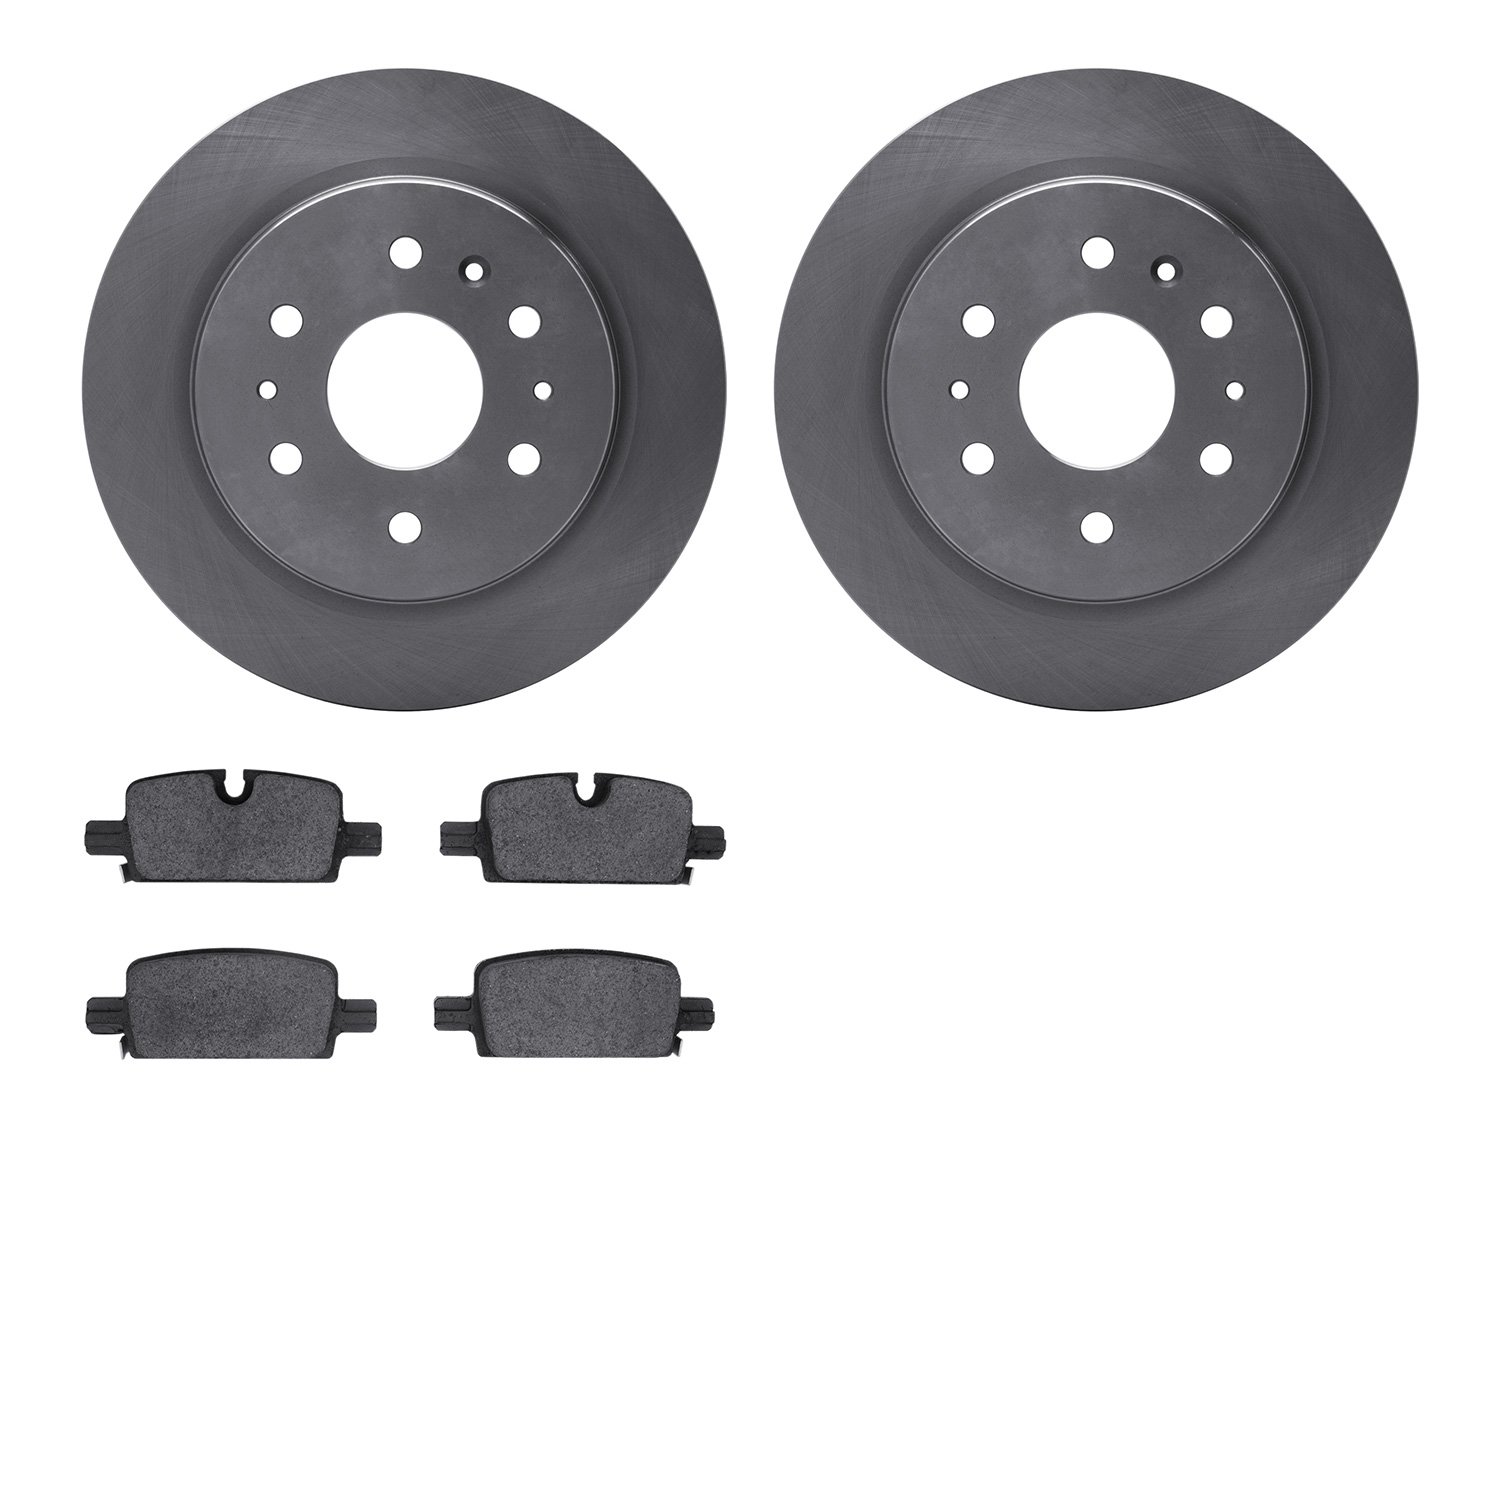 6402-47049 Brake Rotors with Ultimate-Duty Brake Pads, Fits Select GM, Position: Rear